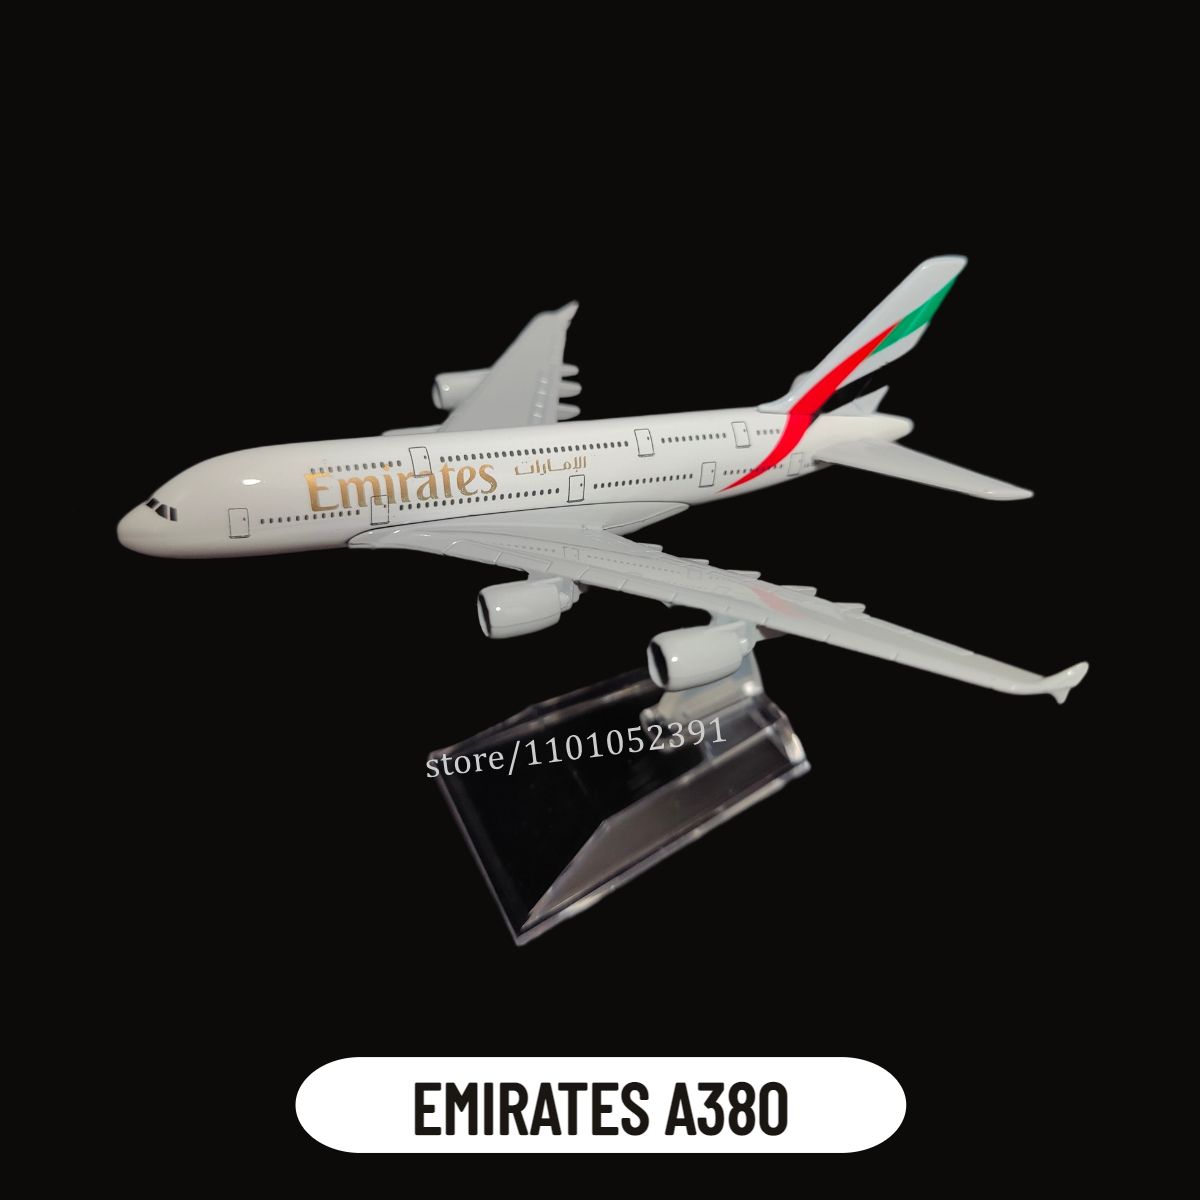 4.mirates a380